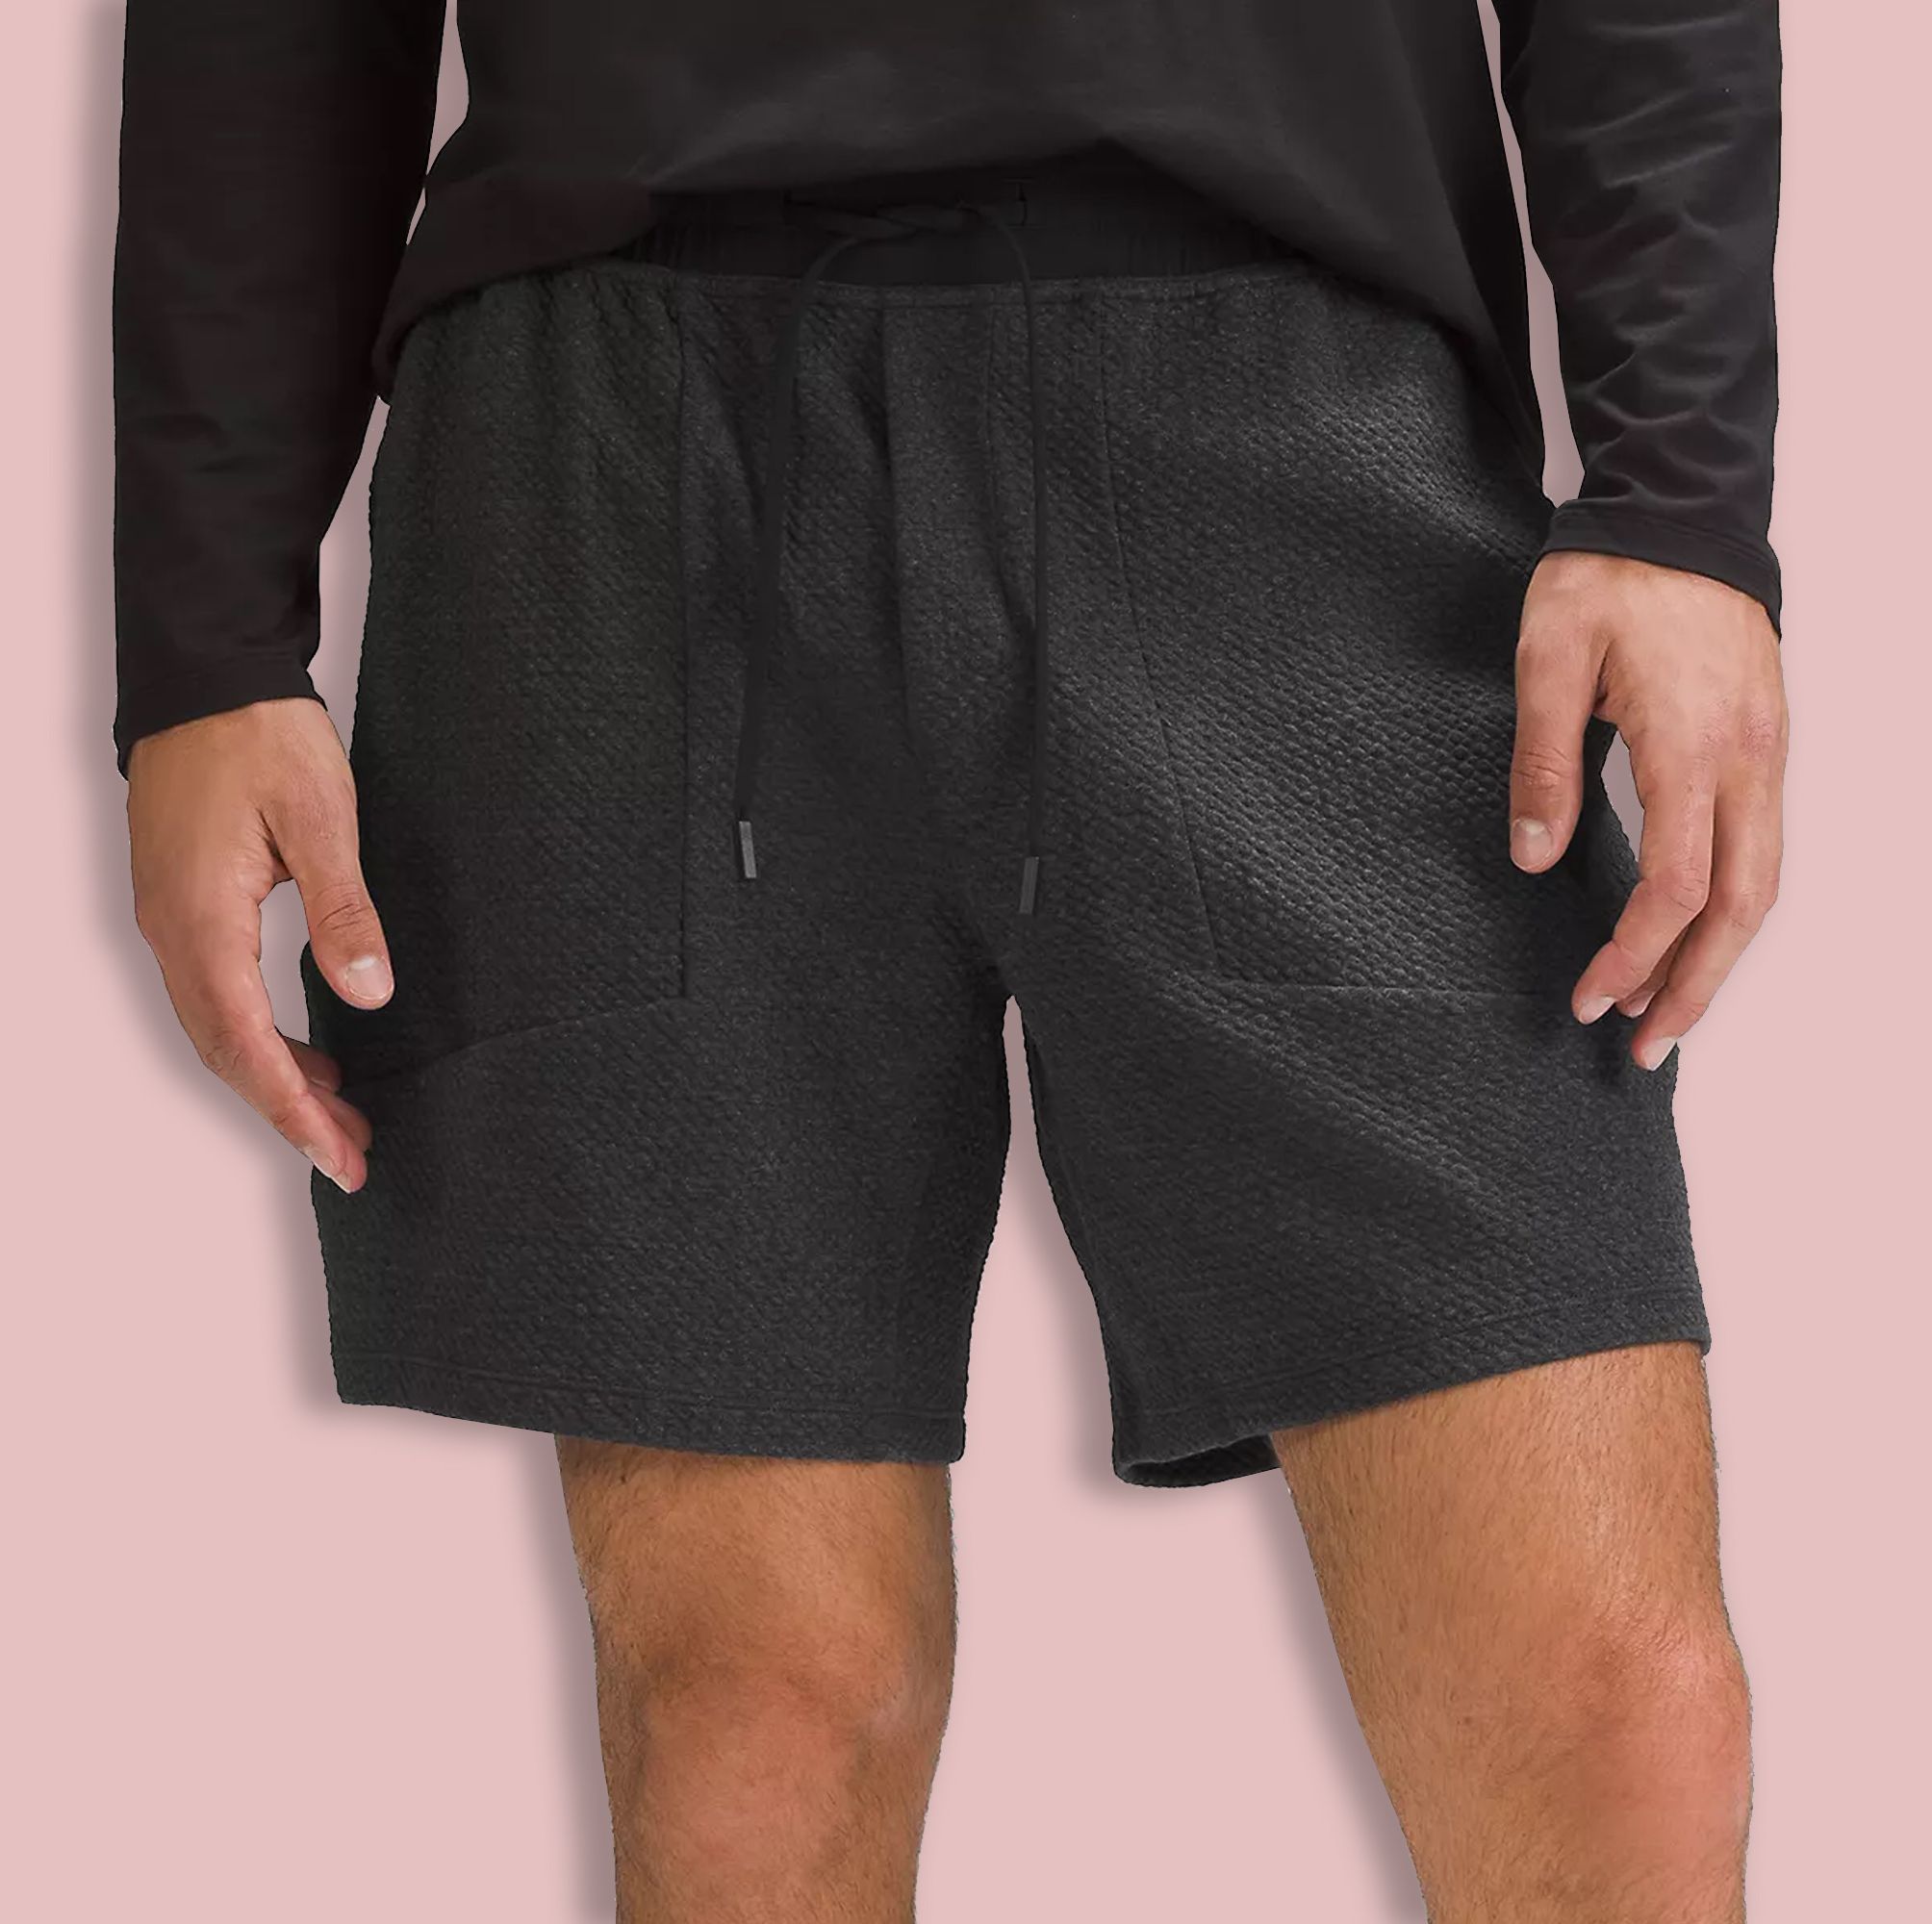 24 Sweat Shorts Made for Weird, In-Between Weather